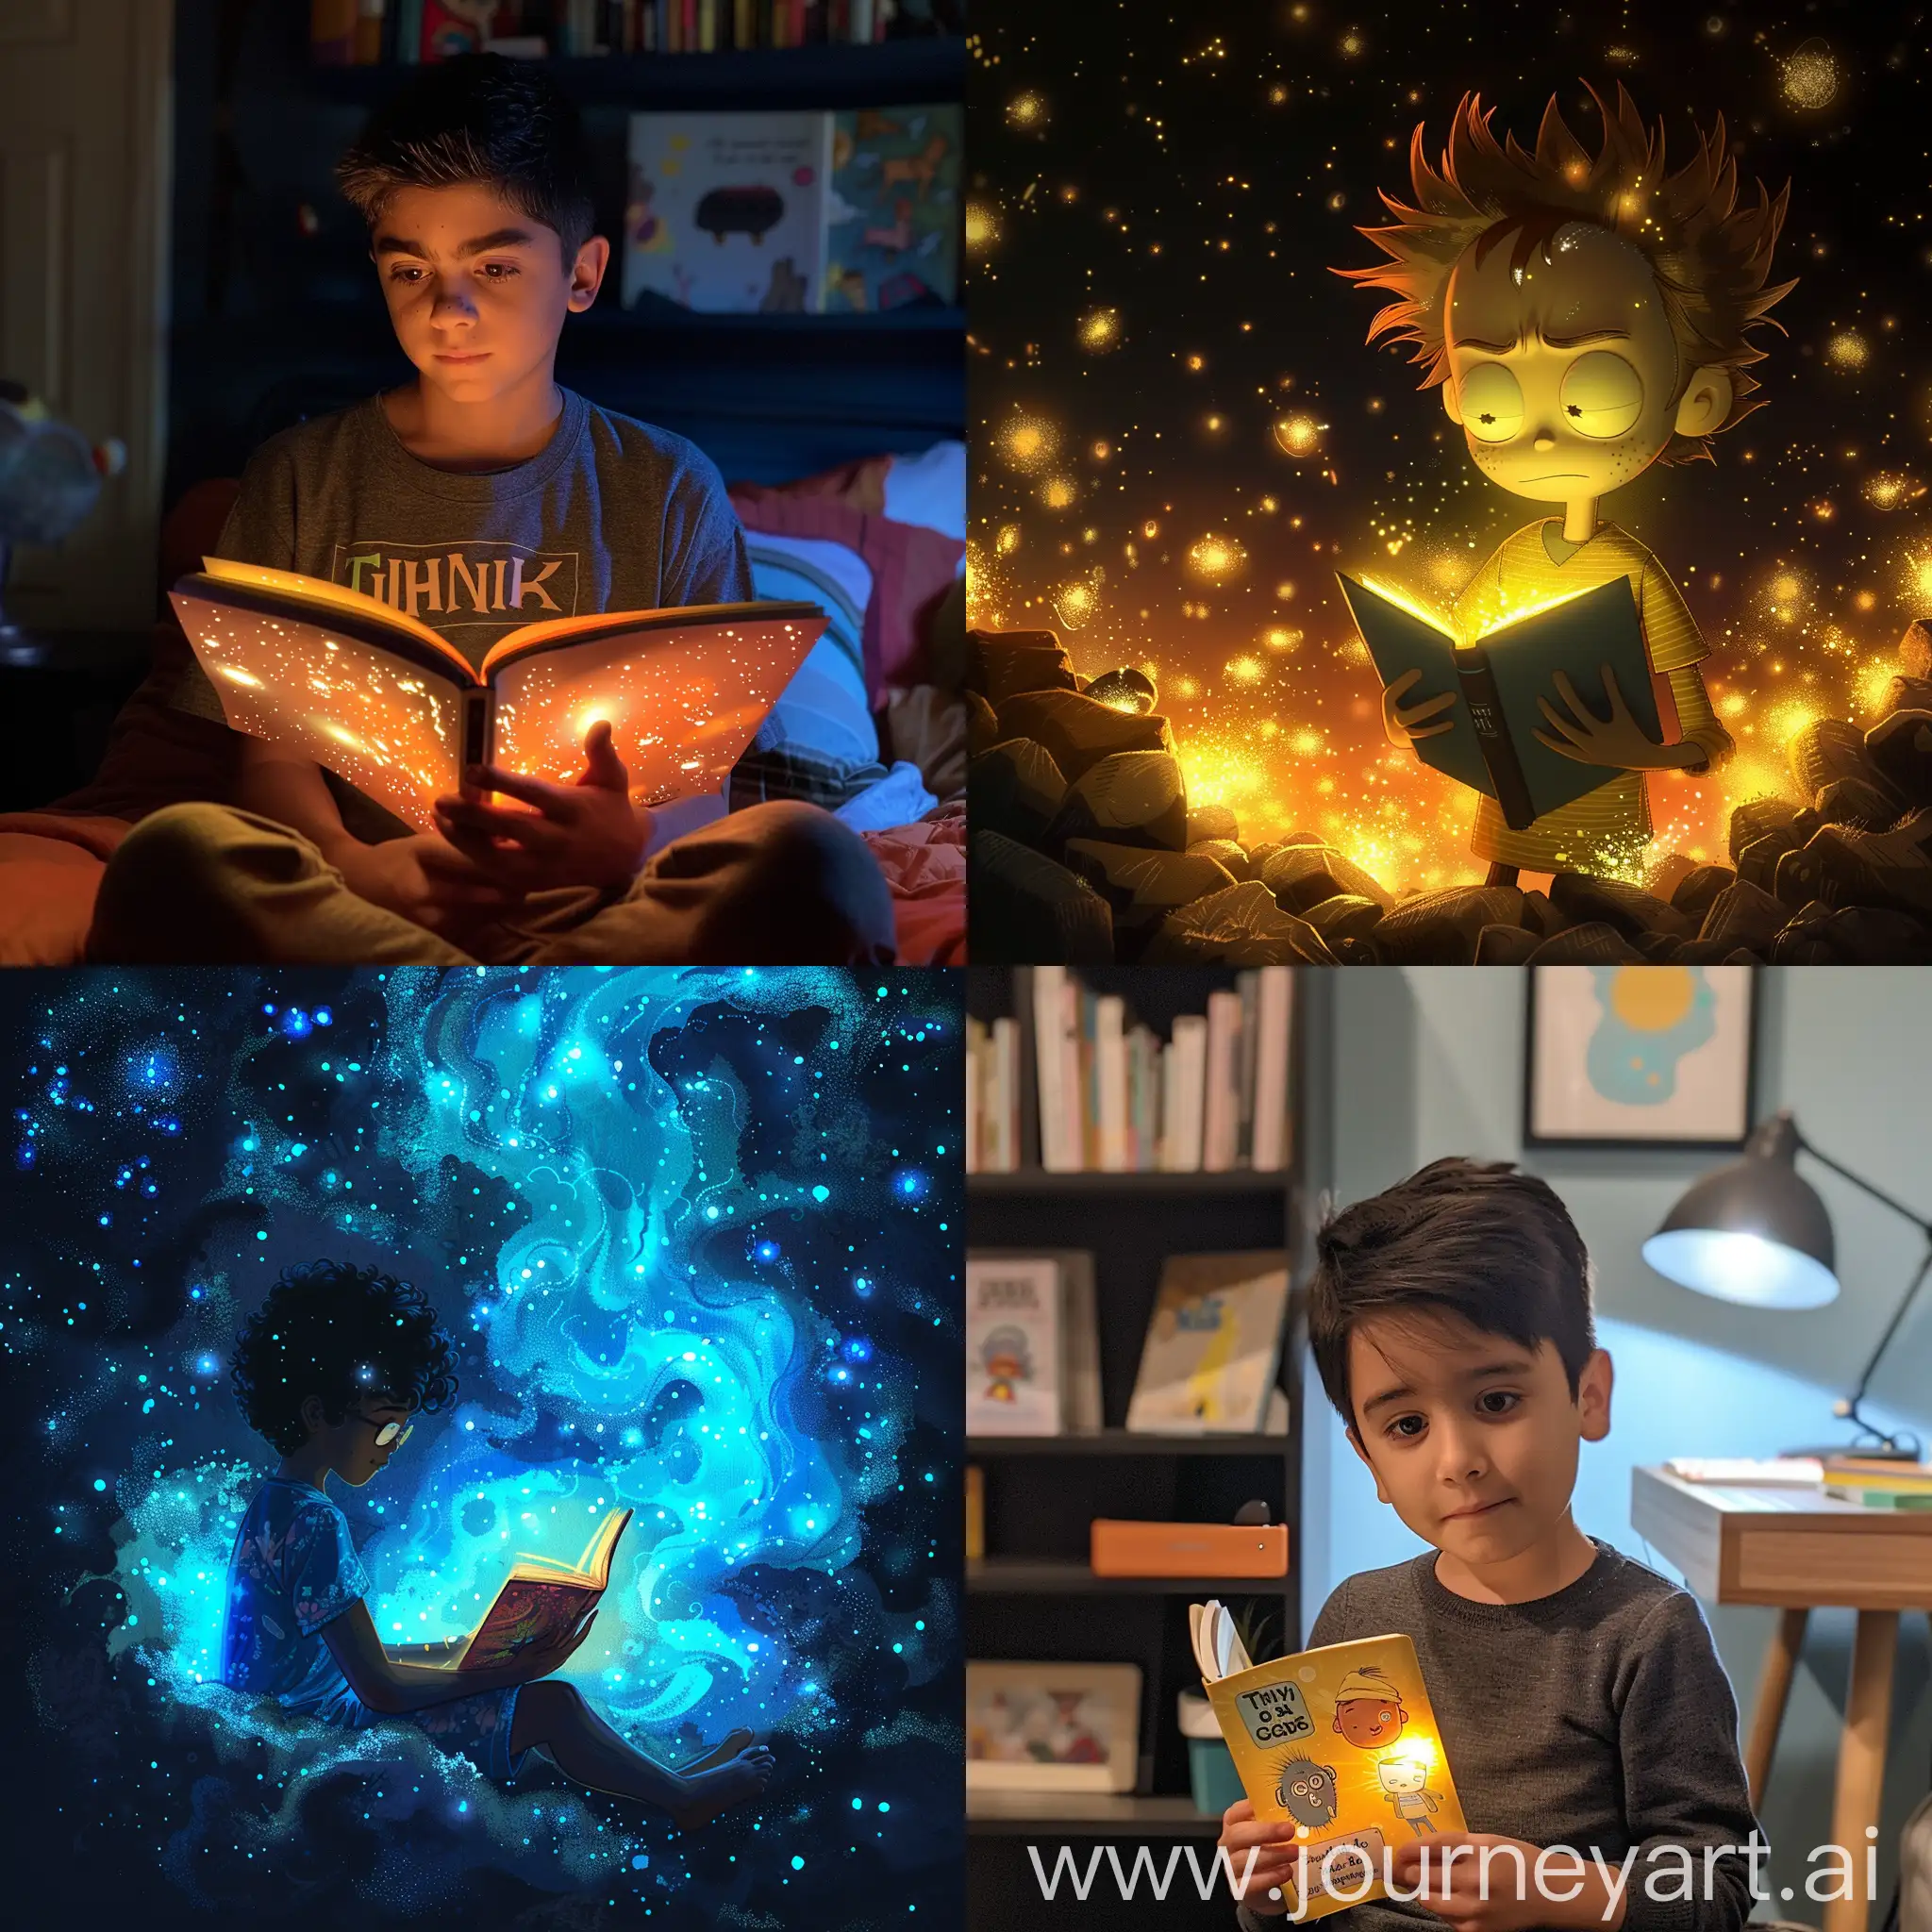 Rick-Reading-Think-and-Glow-Book